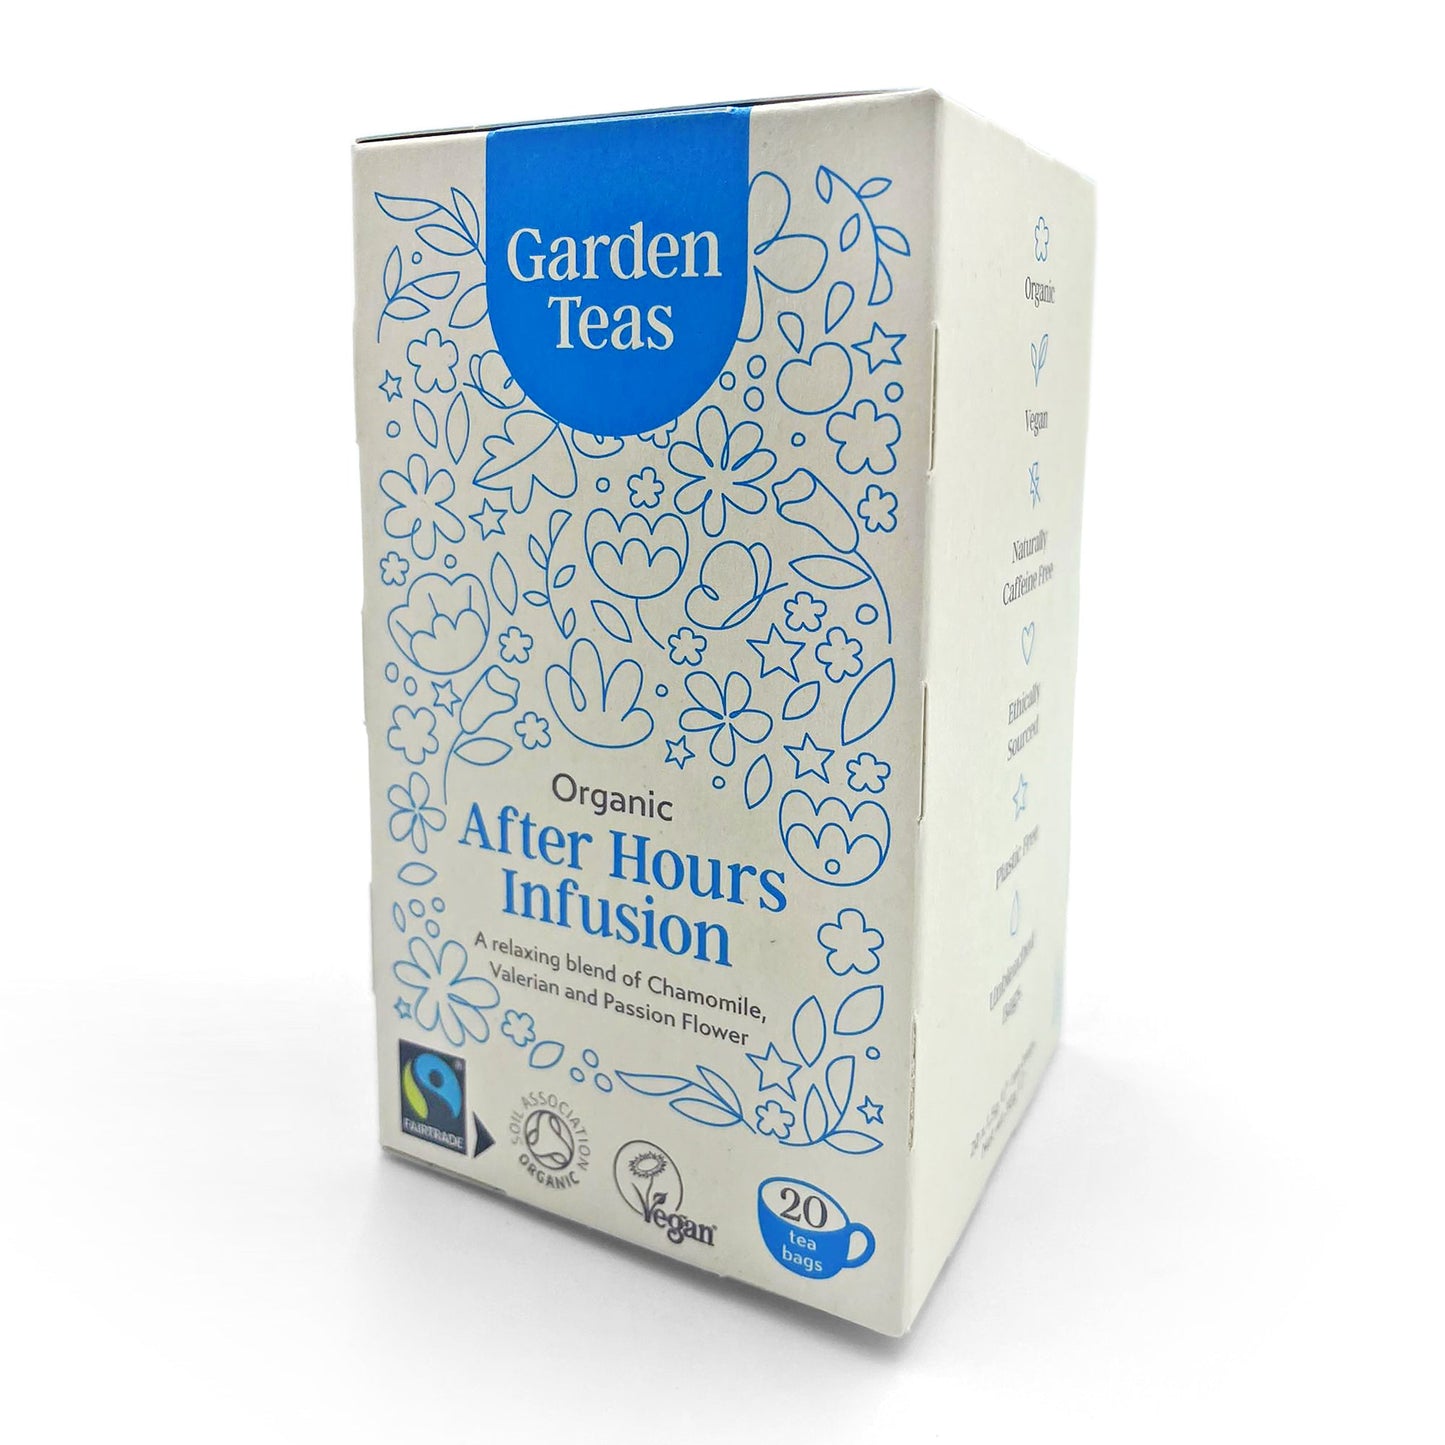 Garden Teas Organic Fairtrade After Hours Infusion 20 Plastic Free Envelopes - Just Natural